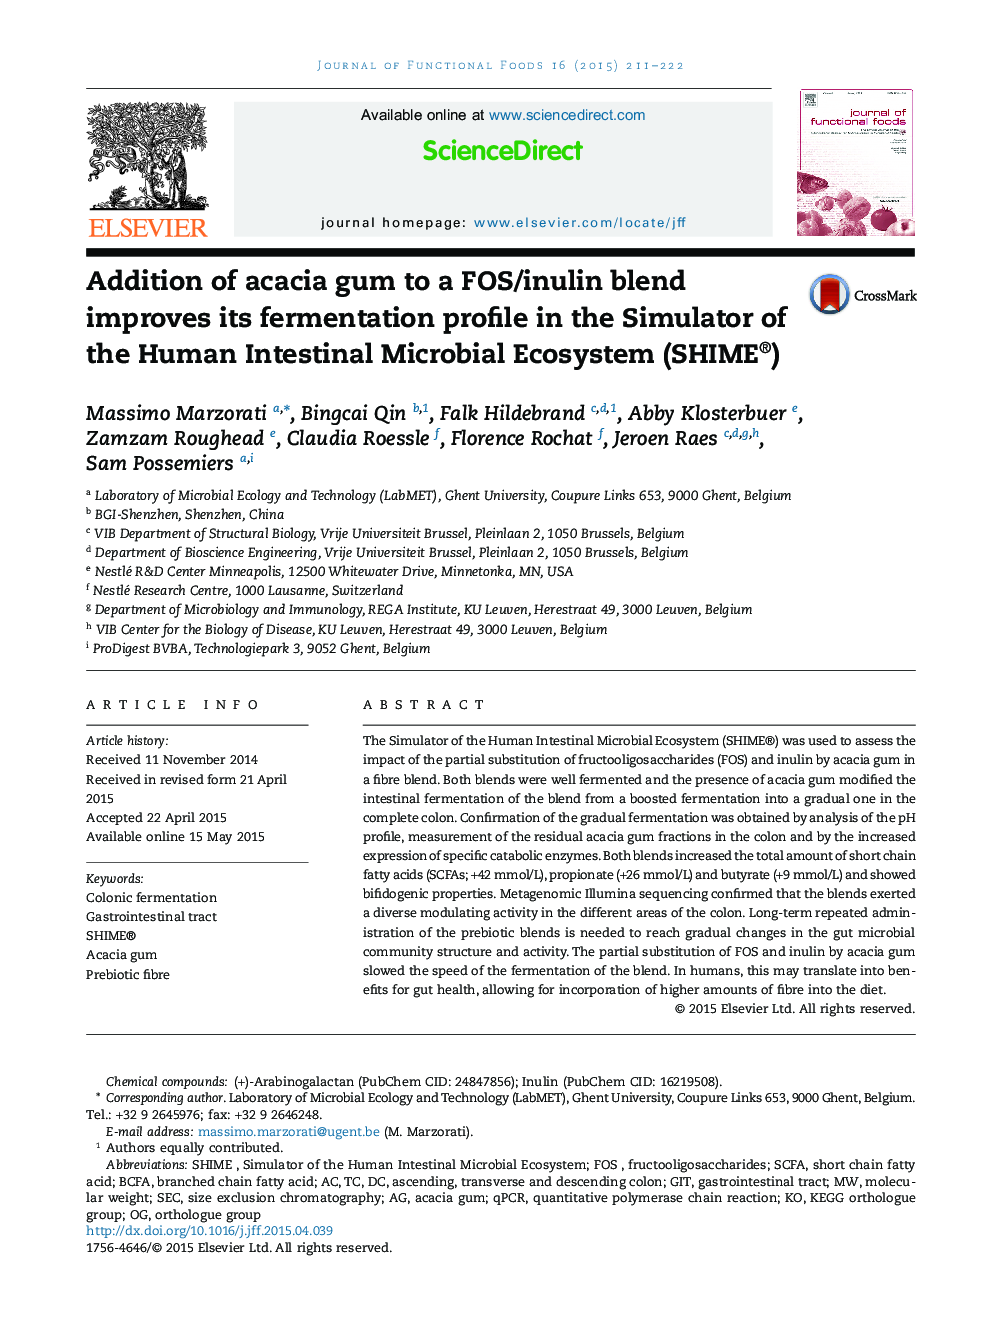 Addition of acacia gum to a FOS/inulin blend improves its fermentation profile in the Simulator of the Human Intestinal Microbial Ecosystem (SHIME®)